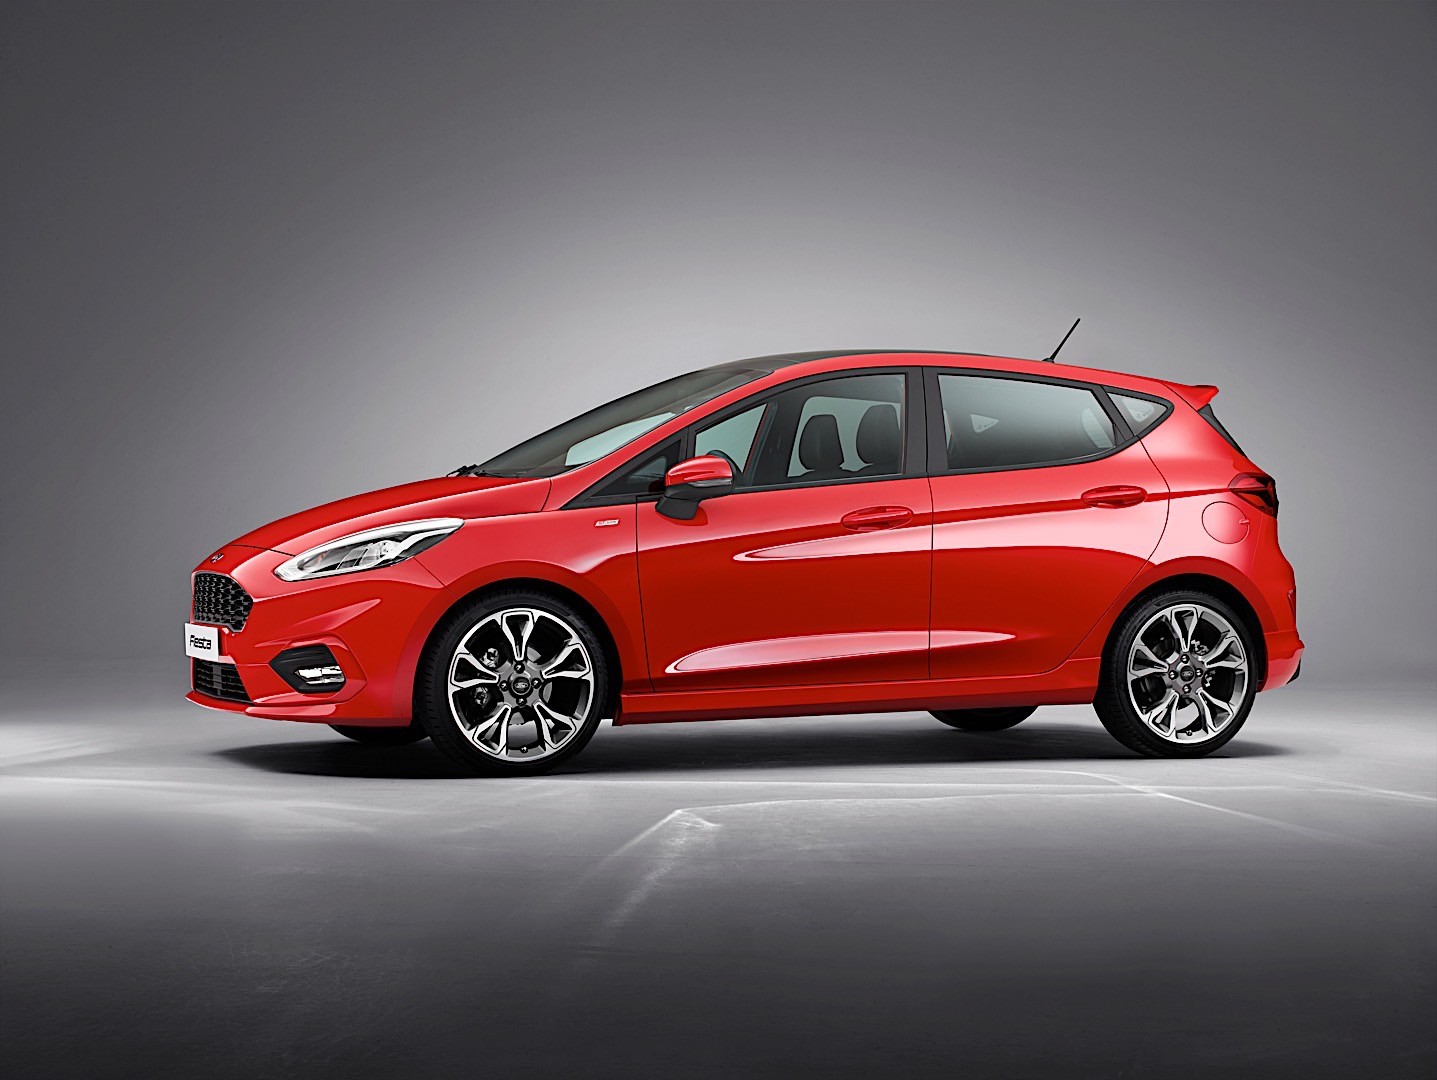 Ford Fiesta 5 Doors Specs And Photos 2017 2018 2019 2020 2021